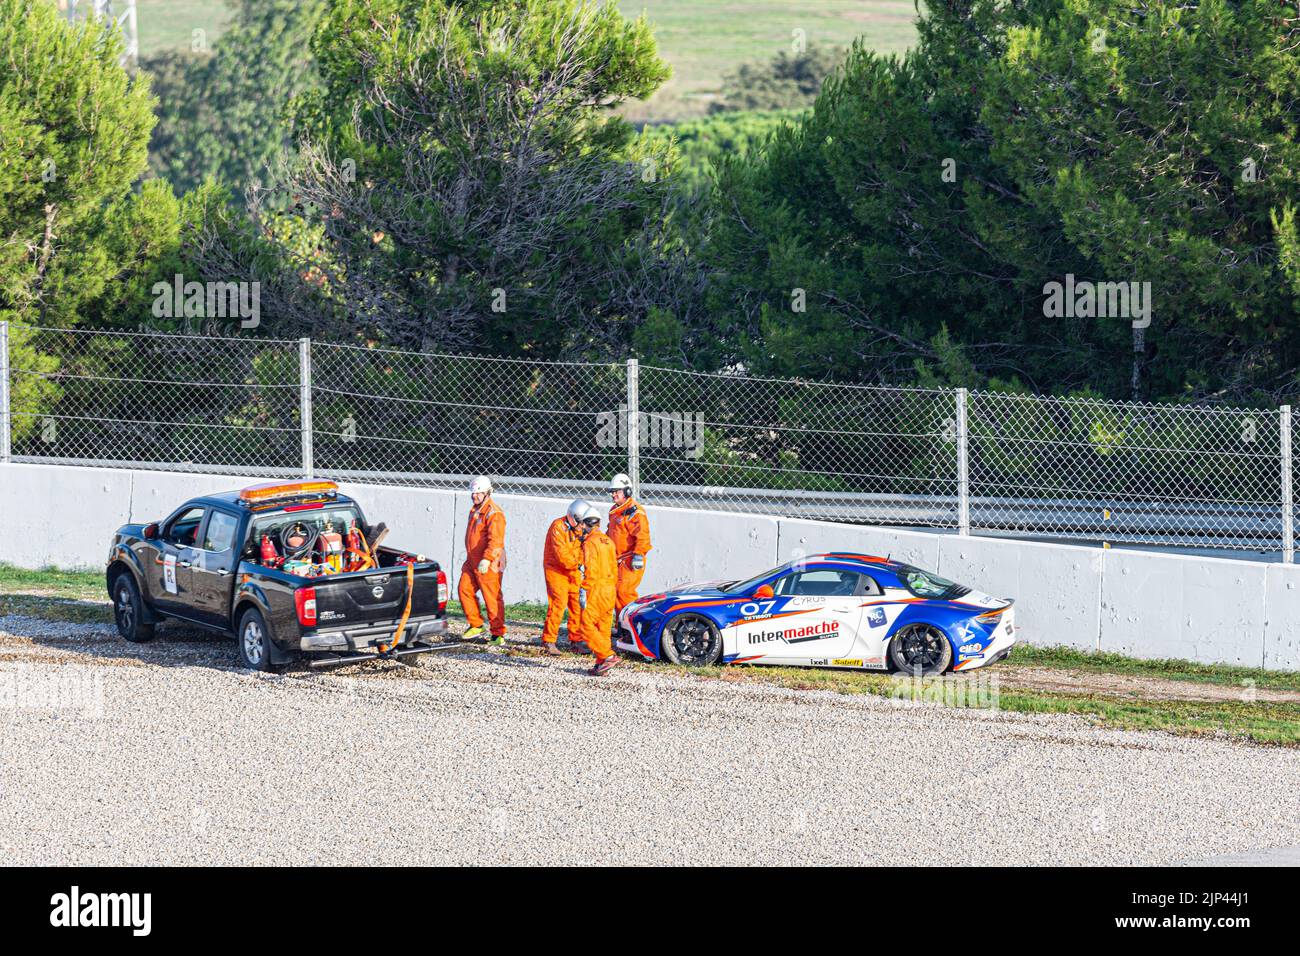 A car towing a racing car that has gone off the track Stock Photo